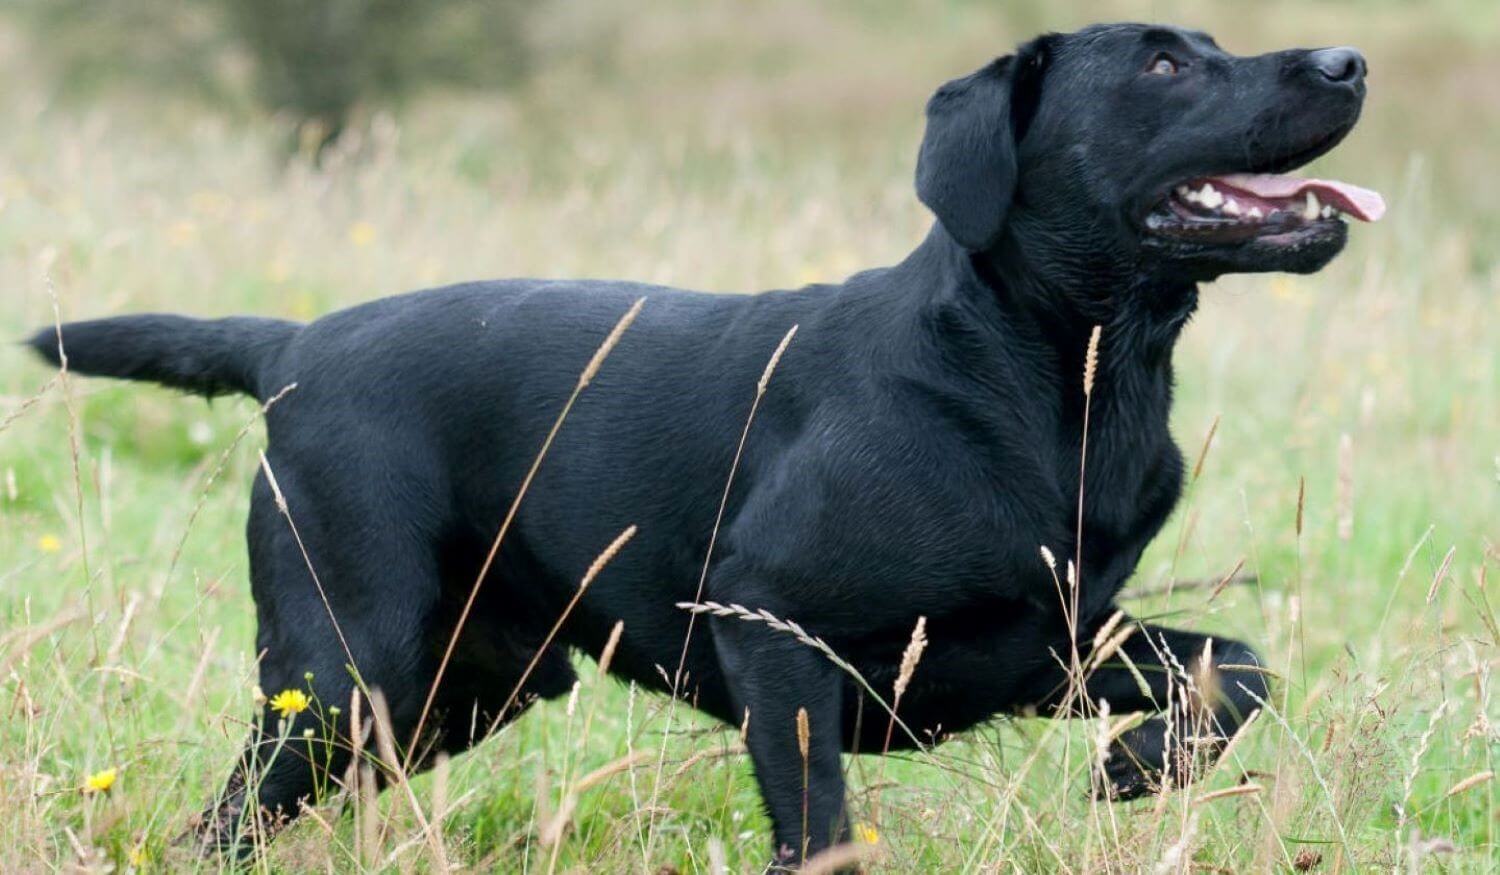 Black labrador retriever running through the grass. How the phrase "the tail that wags the dog" serves as a good metaphor for a spiritual life that can often times be misguided.